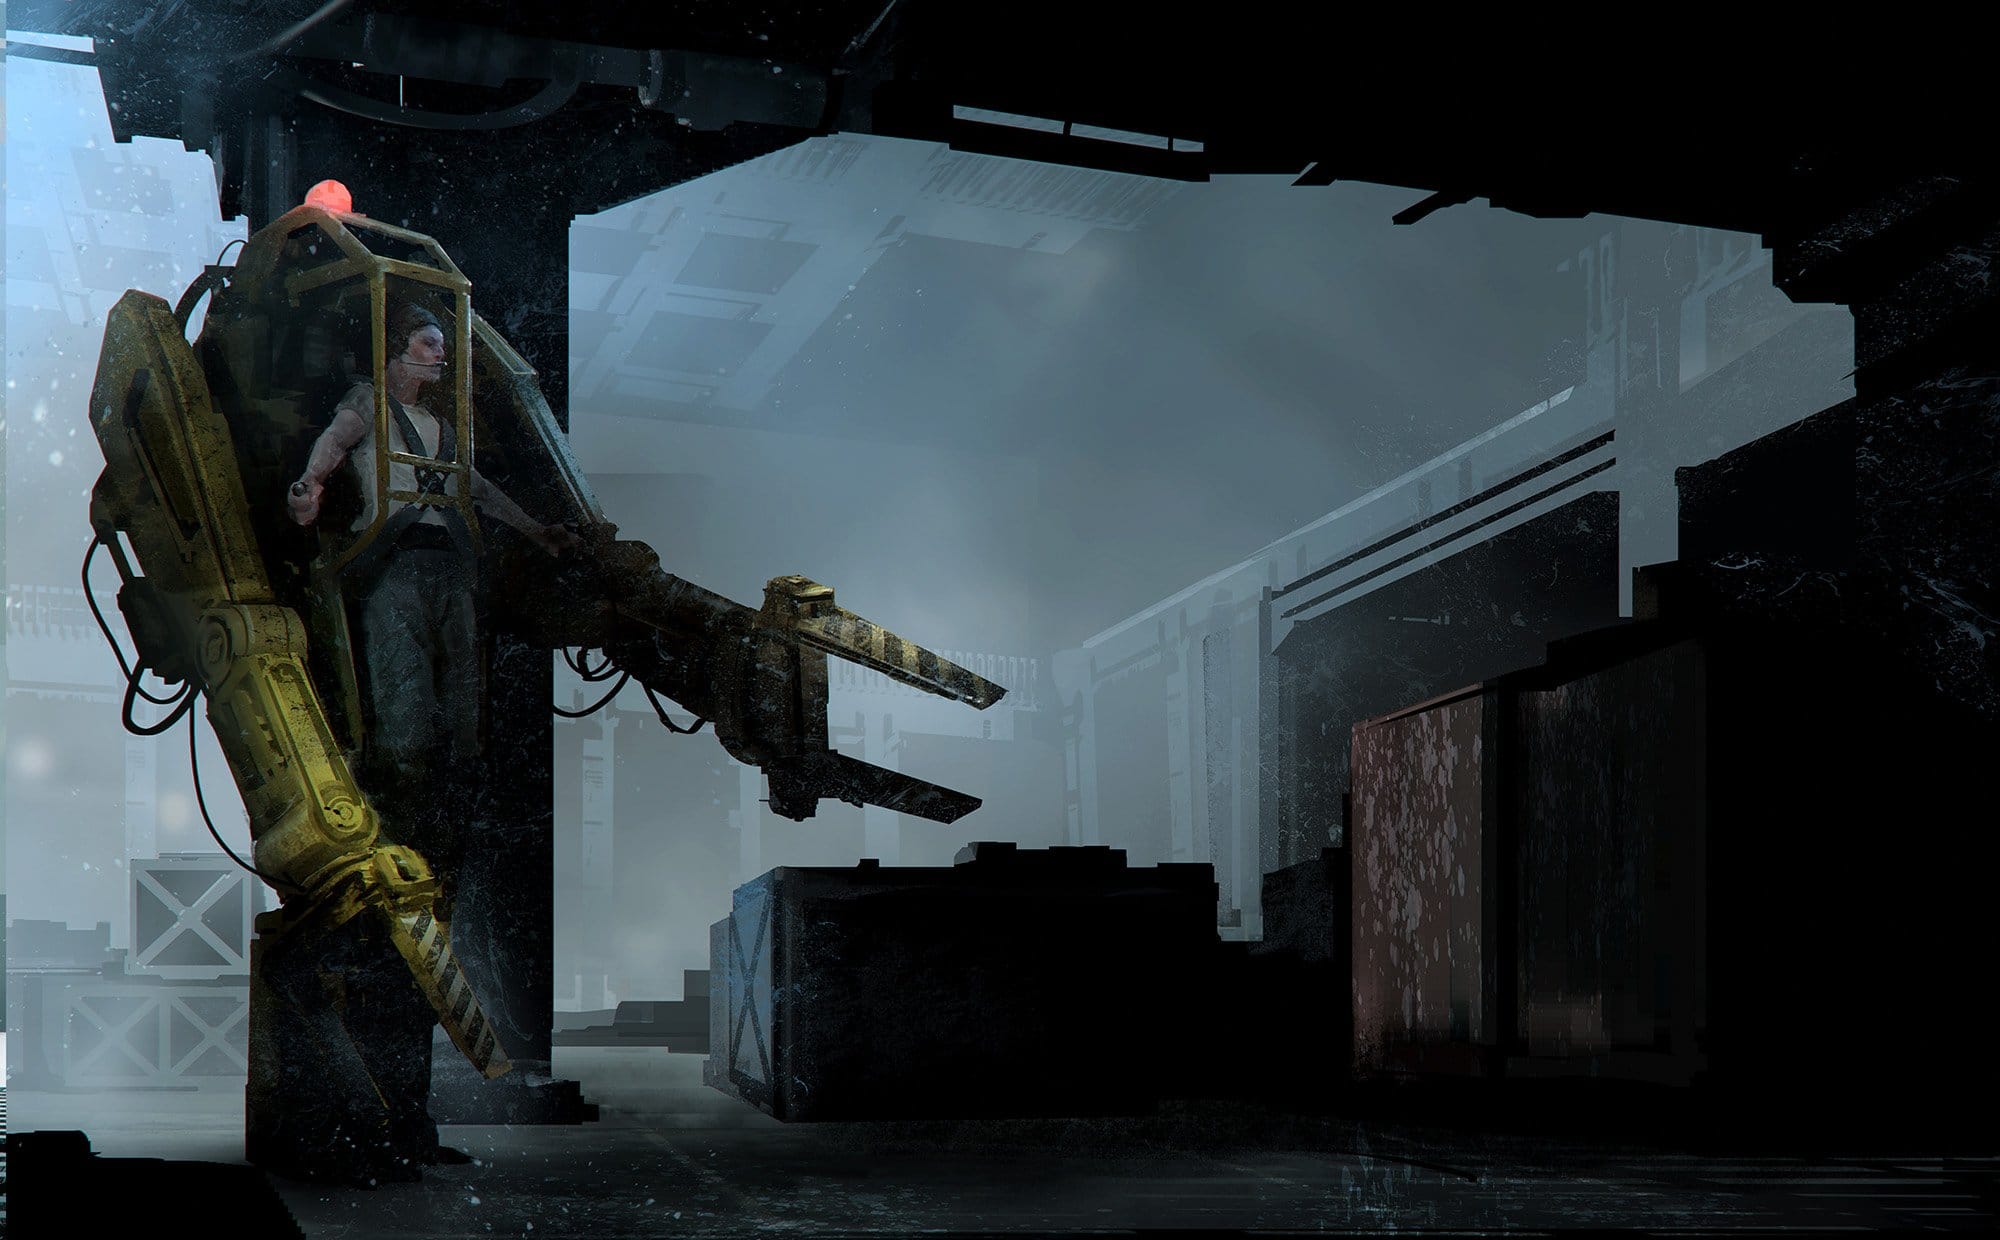 Alien: The Roleplaying Game will feature many illustrations.